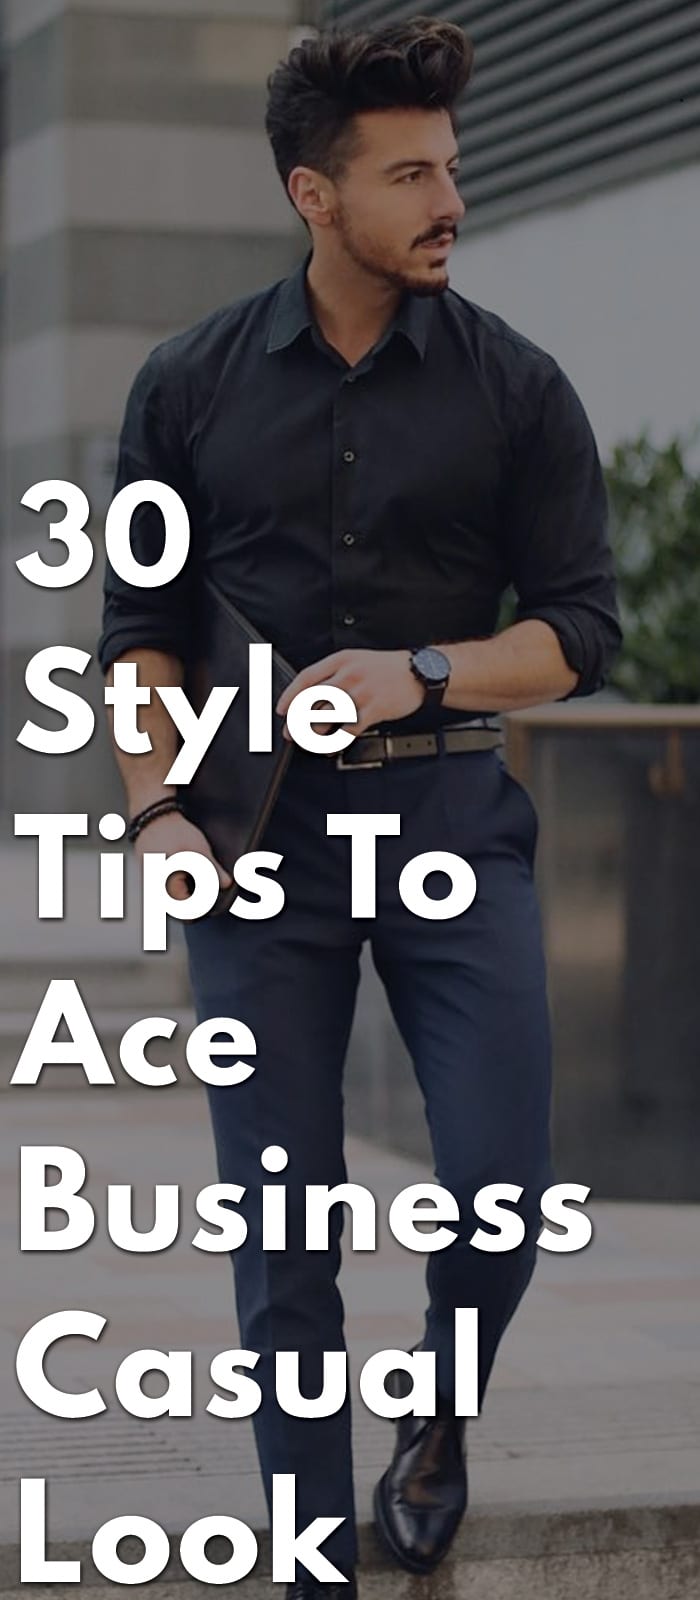 30-Style-Tips-To-Ace-Business-Casual-Look